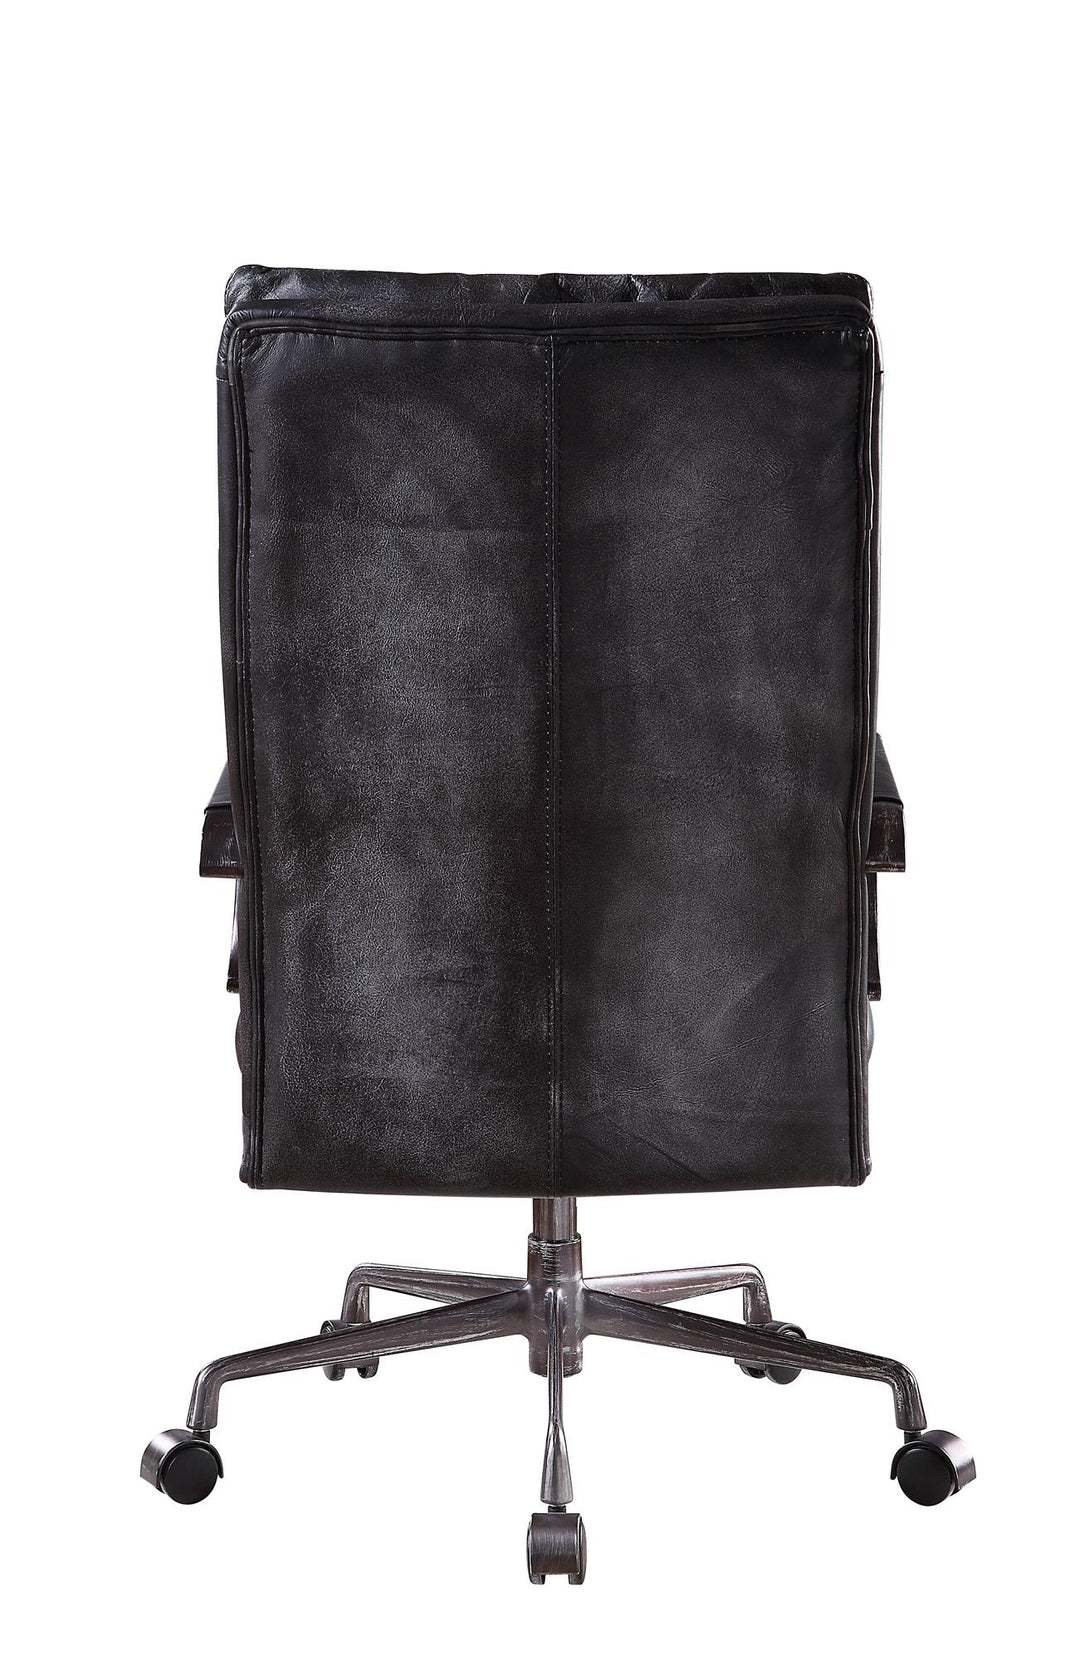 Executive style swivel office chair  - Black